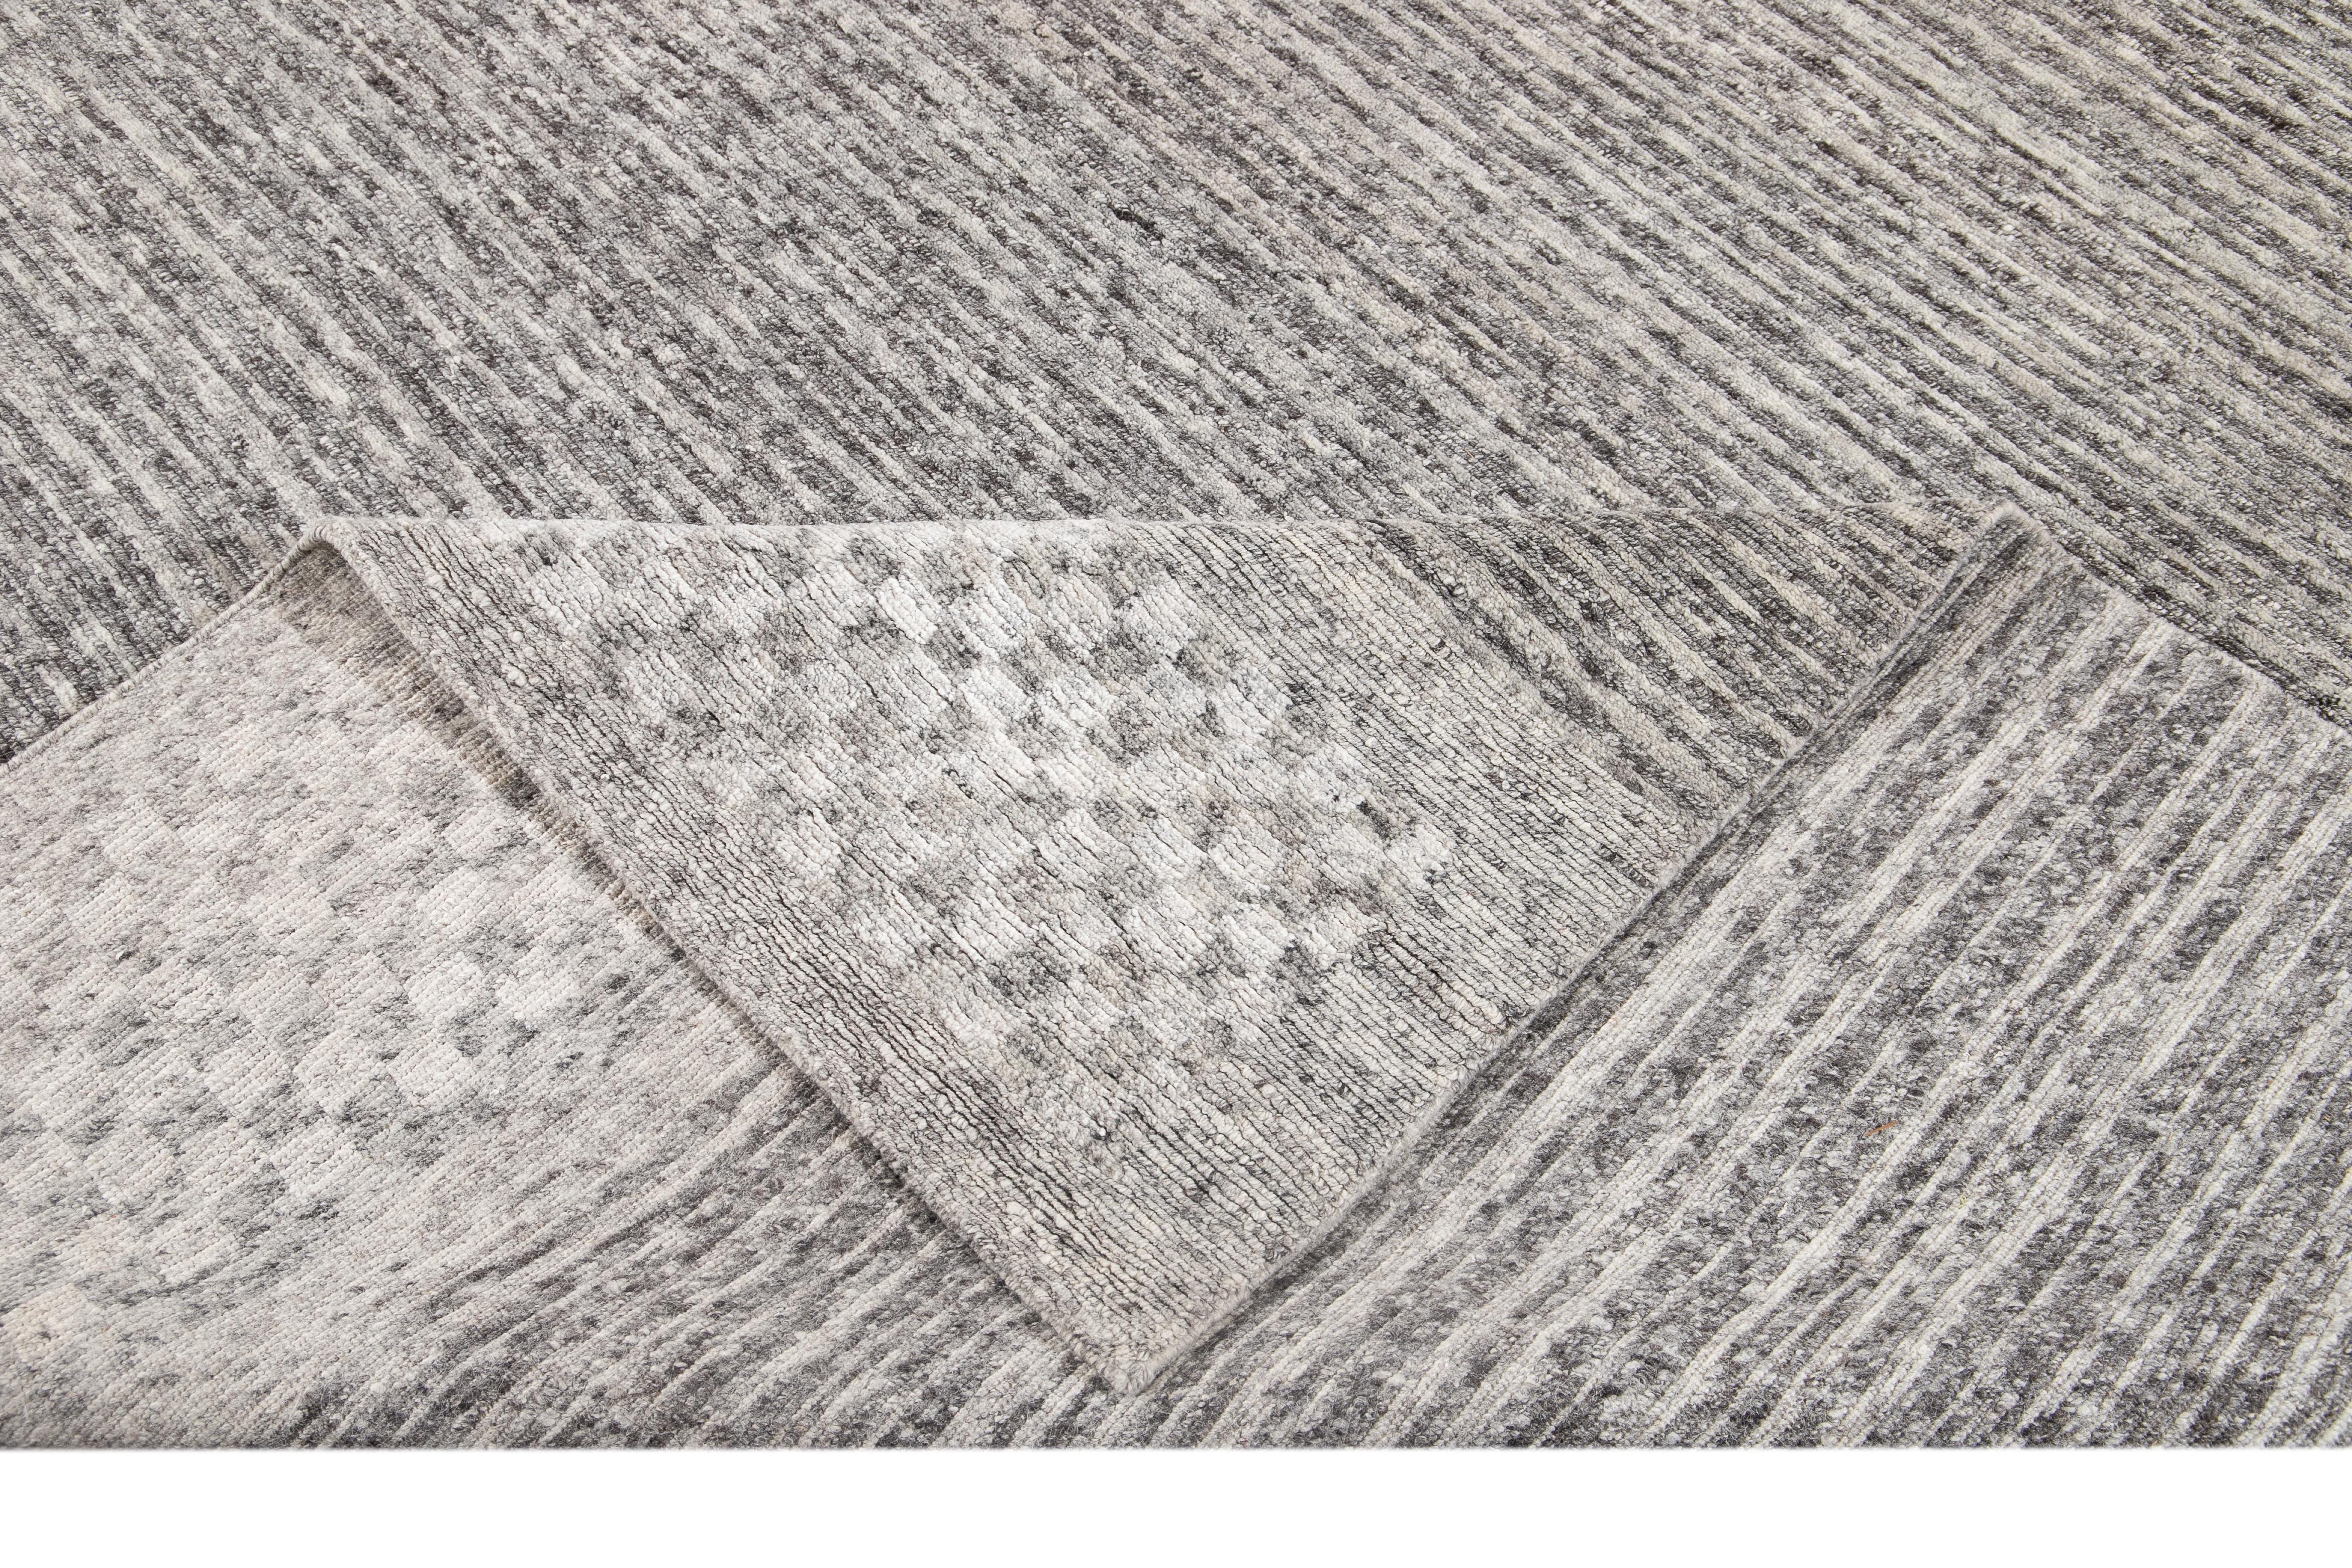 Beautiful Modern Textured Loop Indian Rug, hand-knotted wool with a gray field, dark gray and ivory accents, with checkered borders. 

This rug measures 9' 10